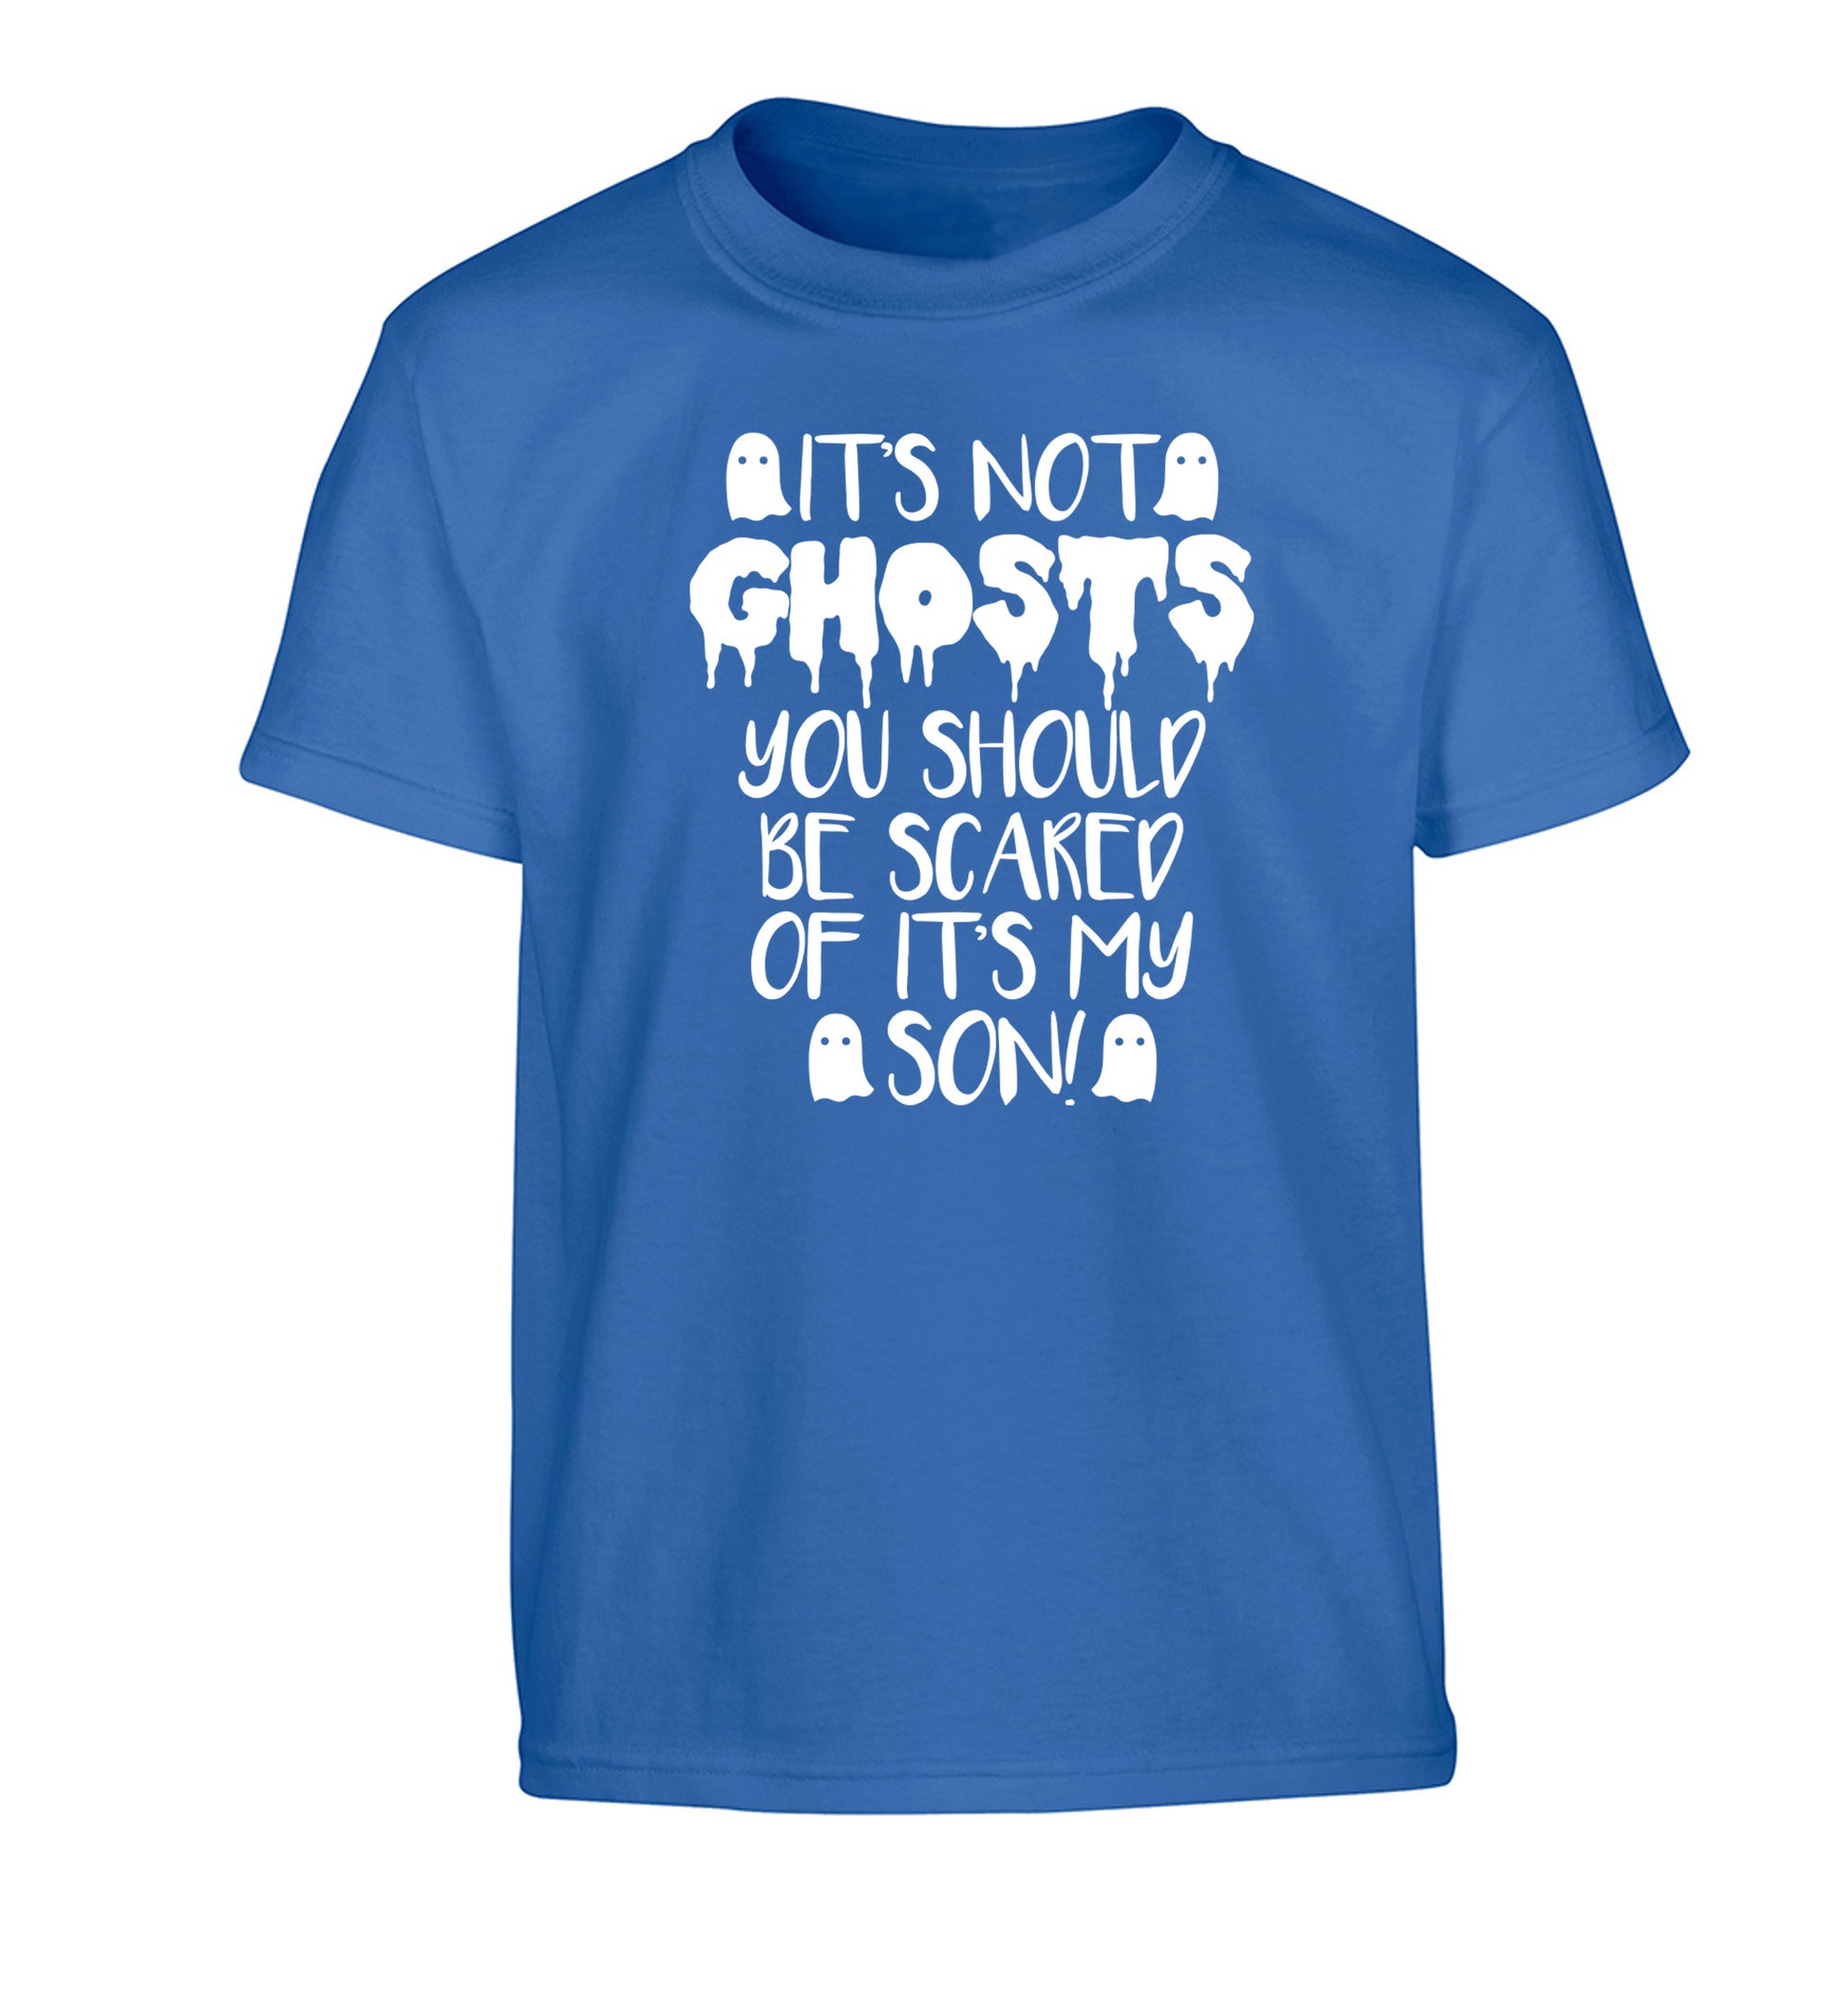 It's not ghosts you should be scared of it's my son! Children's blue Tshirt 12-14 Years